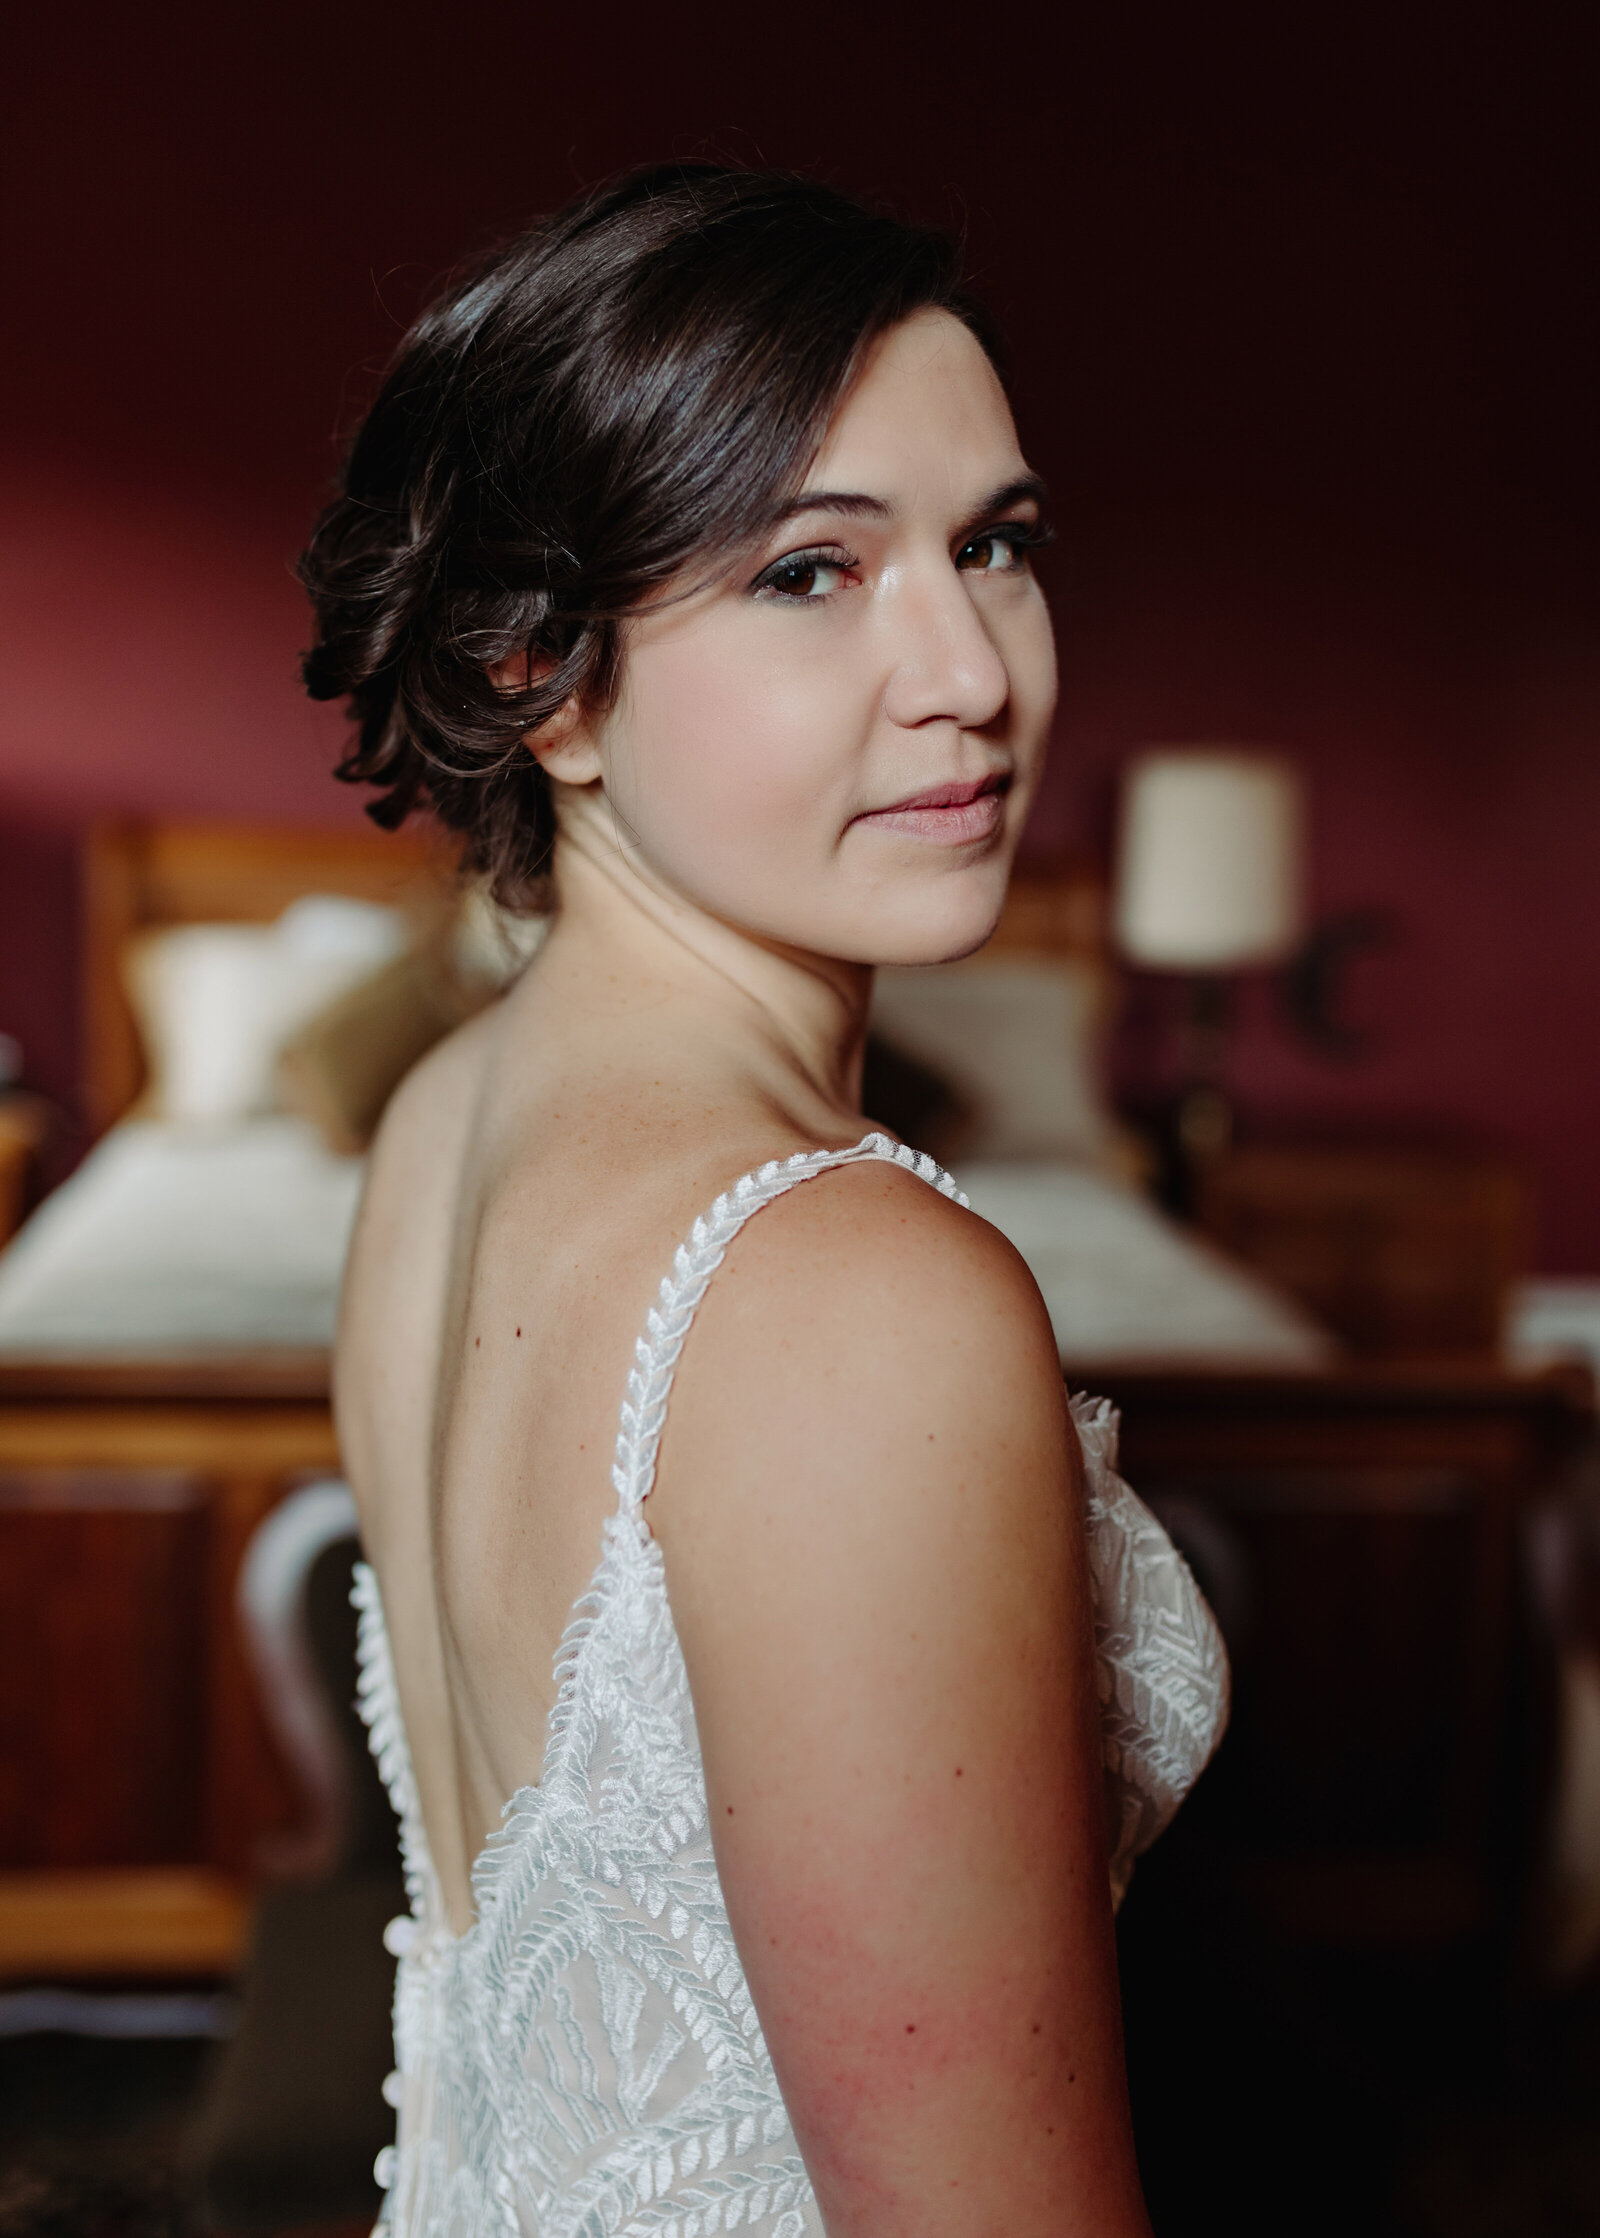 A bride in a vintage wedding dress looks at the camera